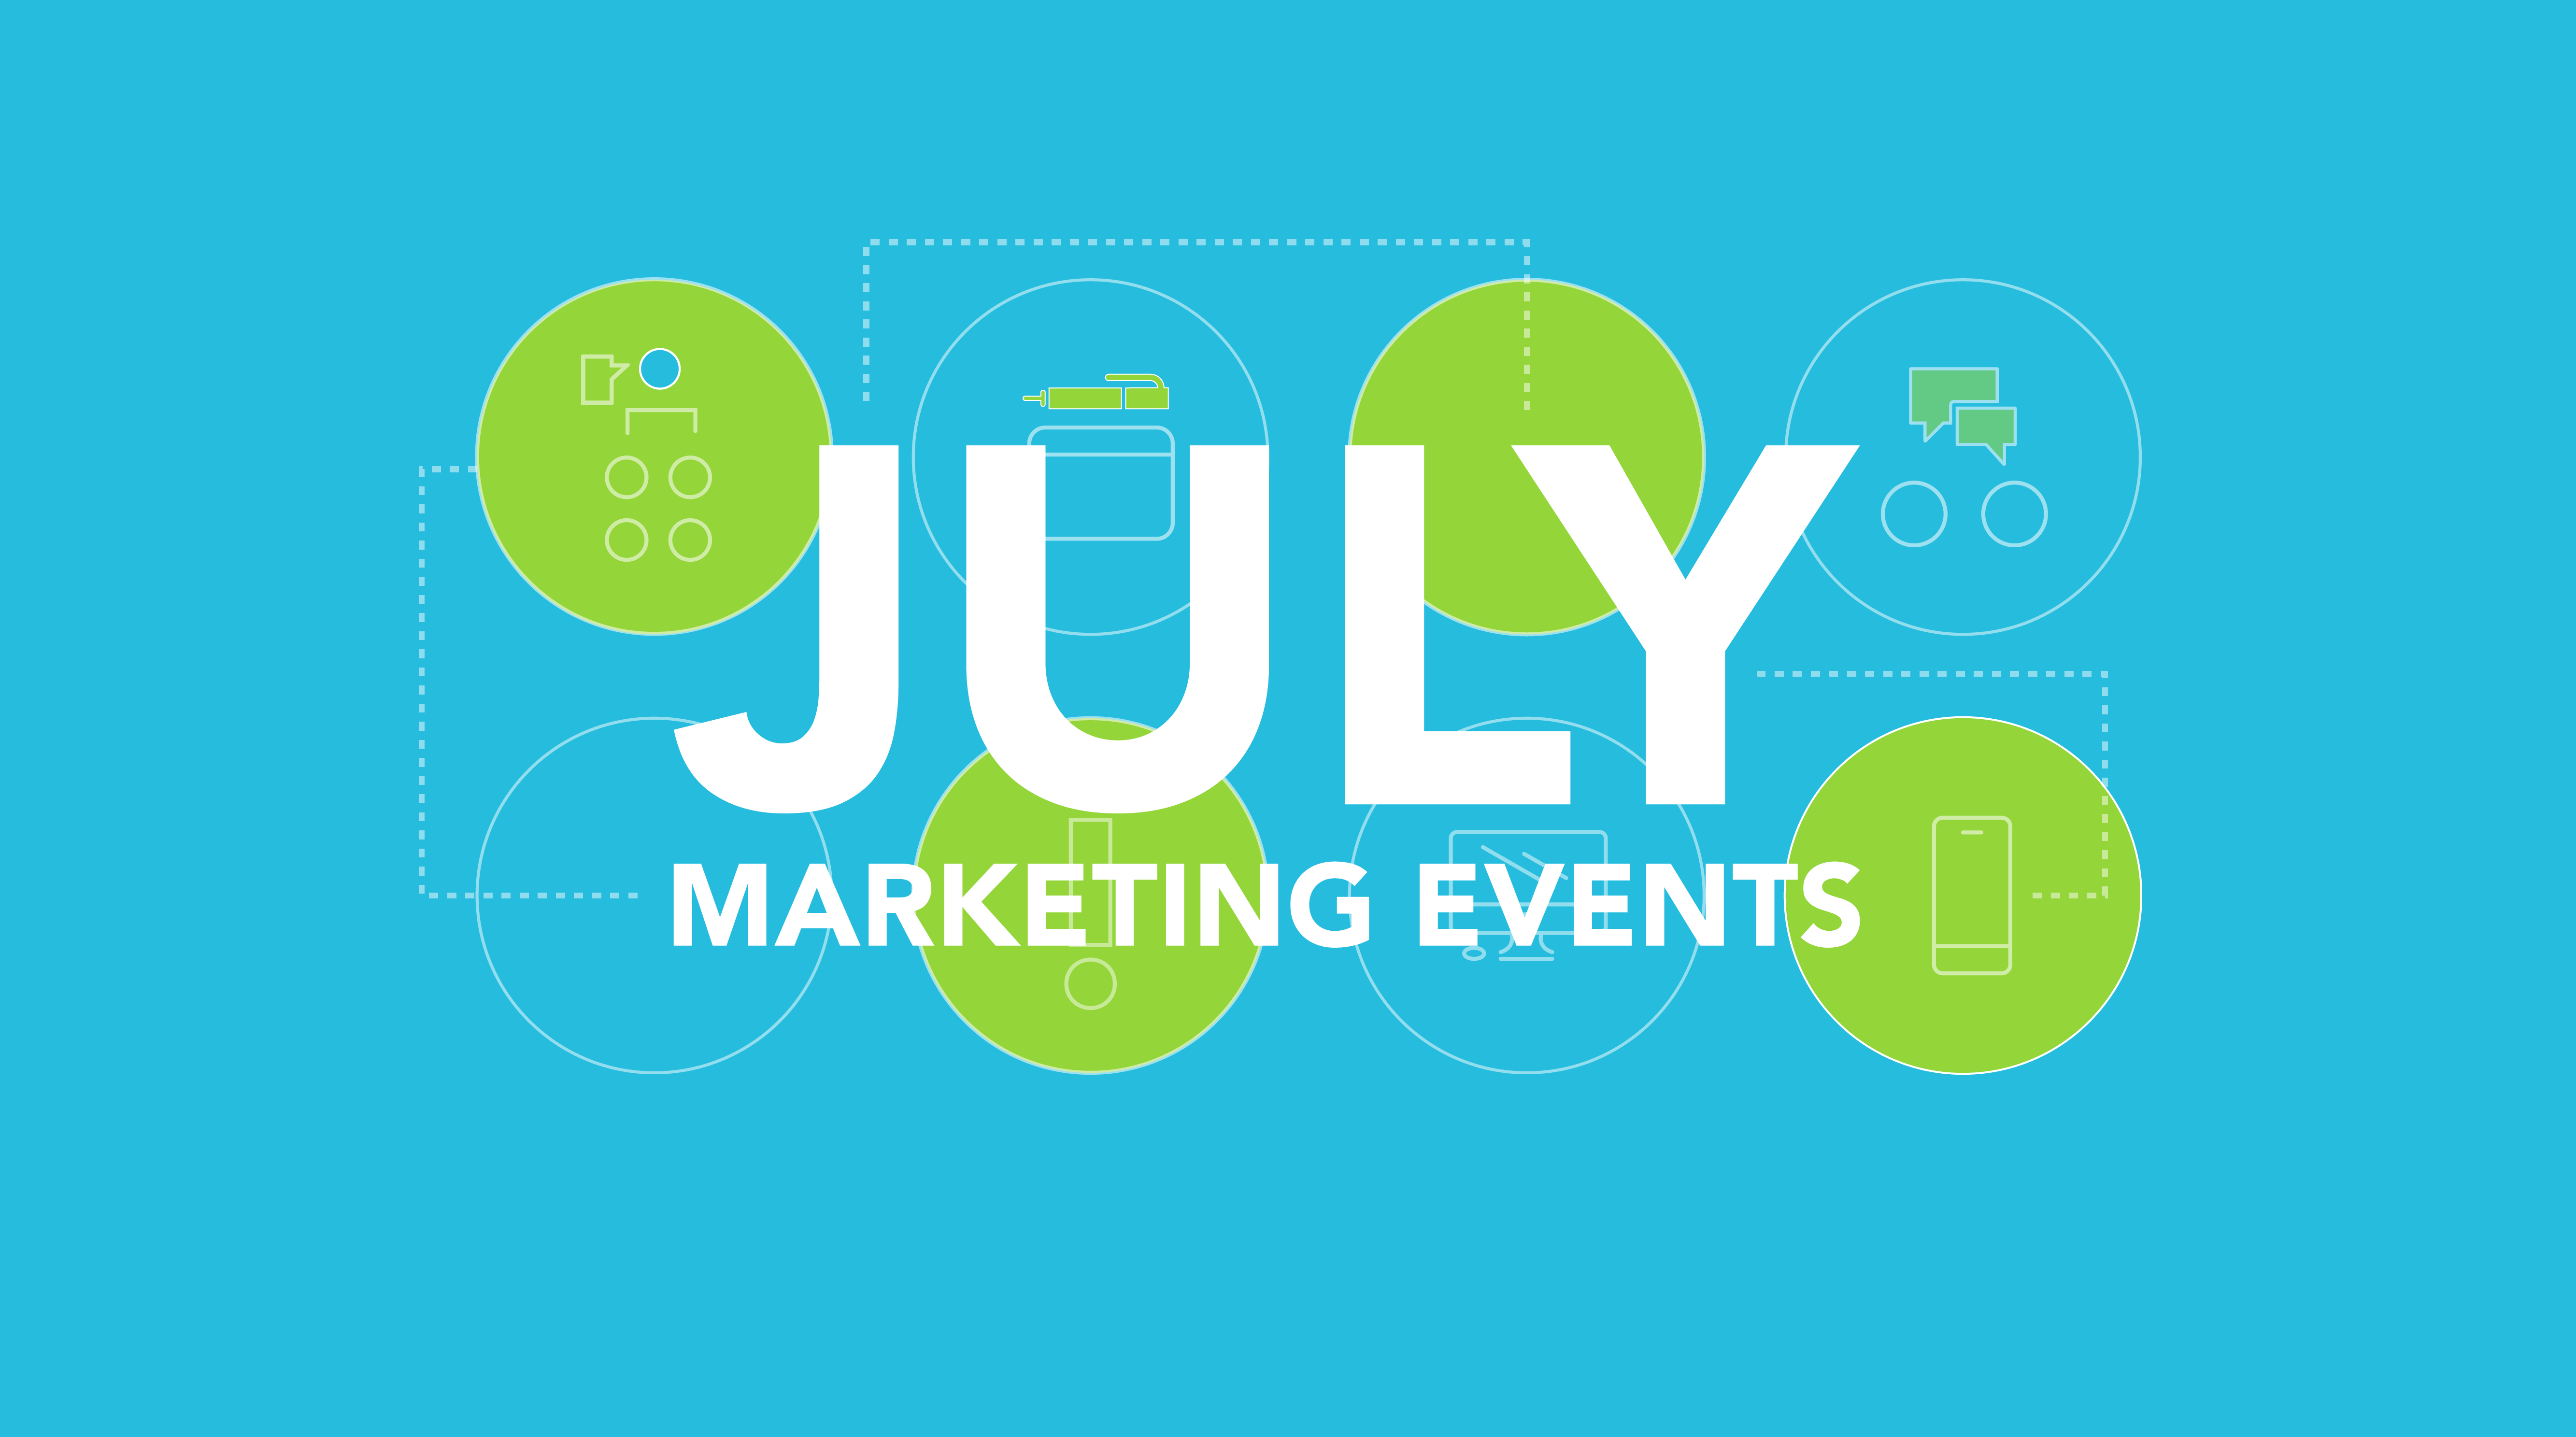 July 2015 Marketing and Design Events in St. Louis